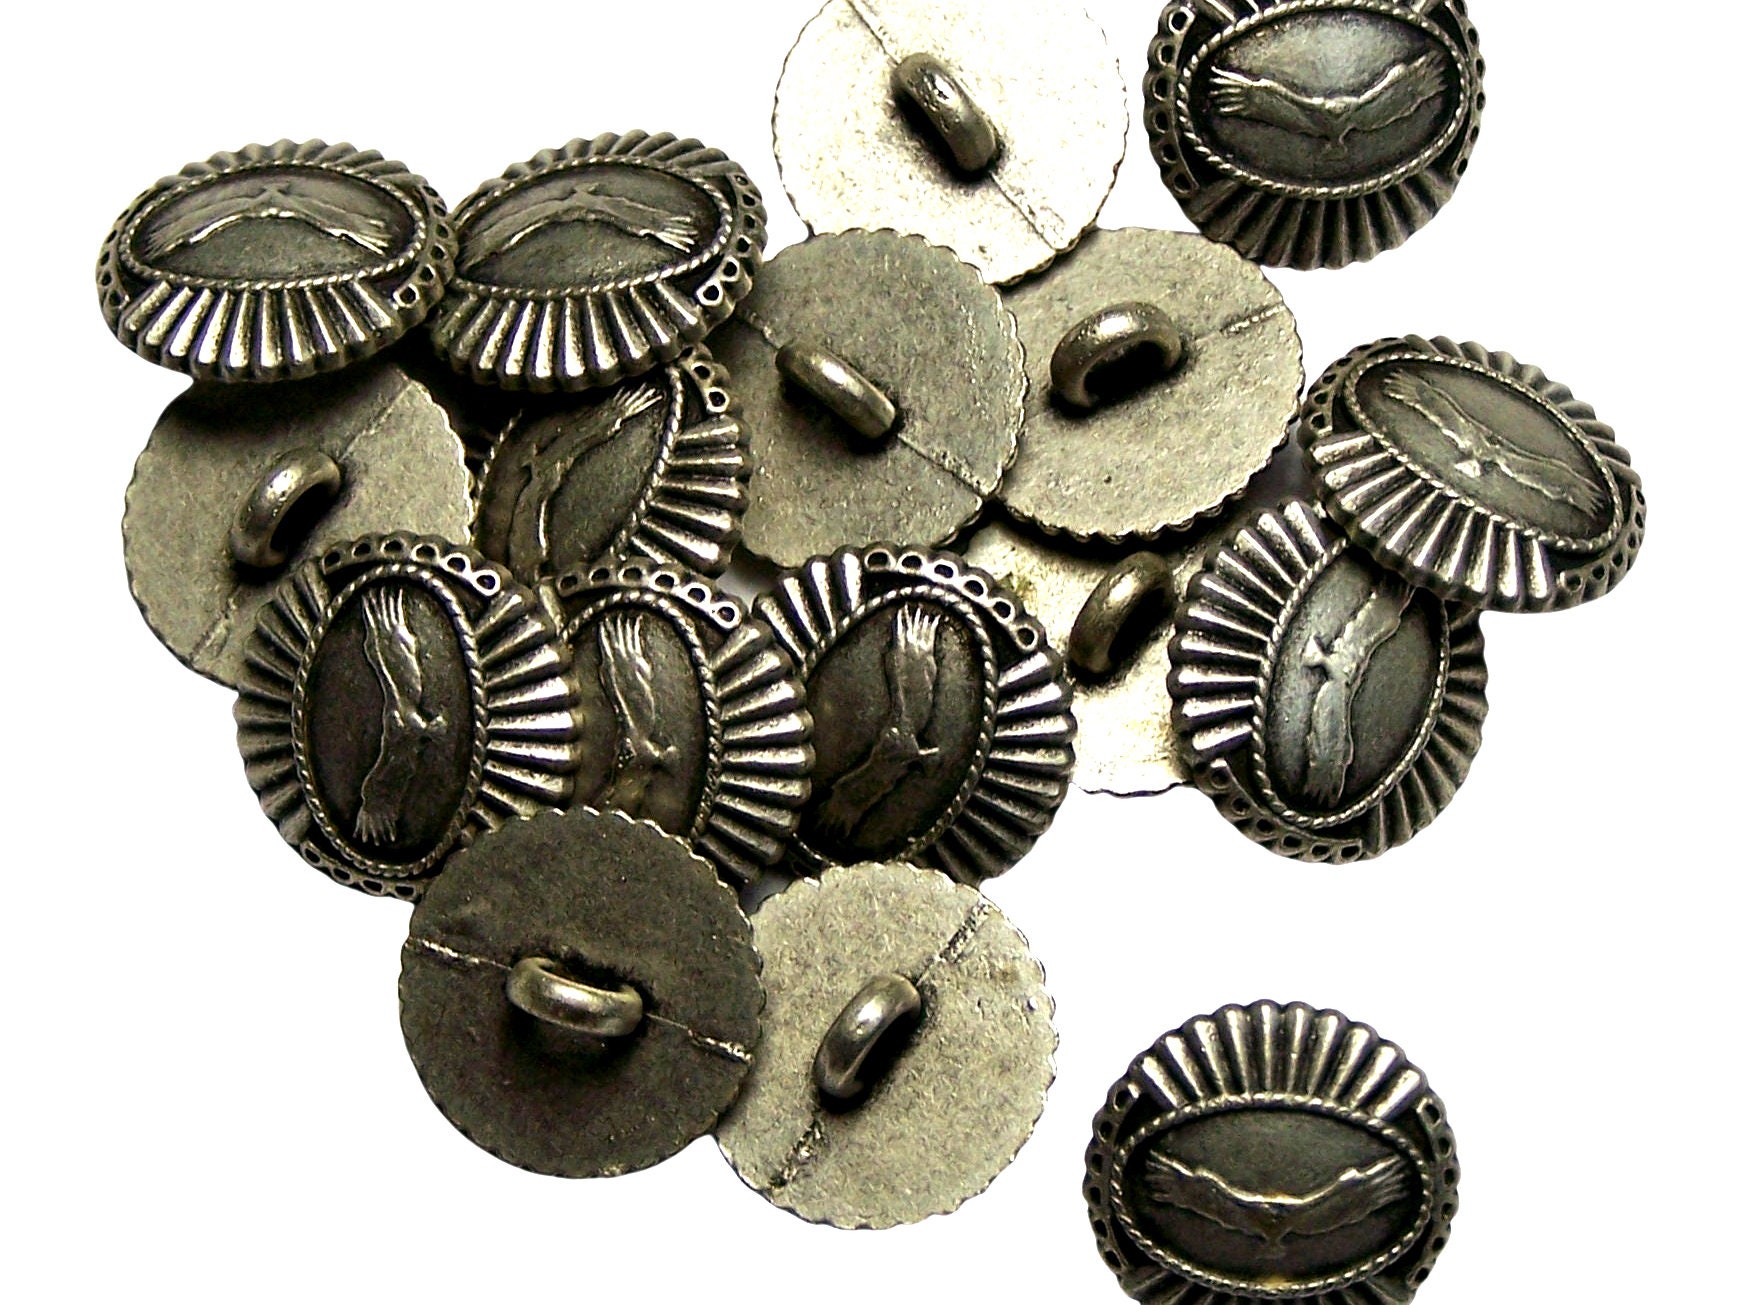 15 Metal Buttons With Rose, 17mm, No Sew Tack Button, Bronze Tone Metal,  Jean Jacket Button, Flower, Sewing Supply, Denim Repair 